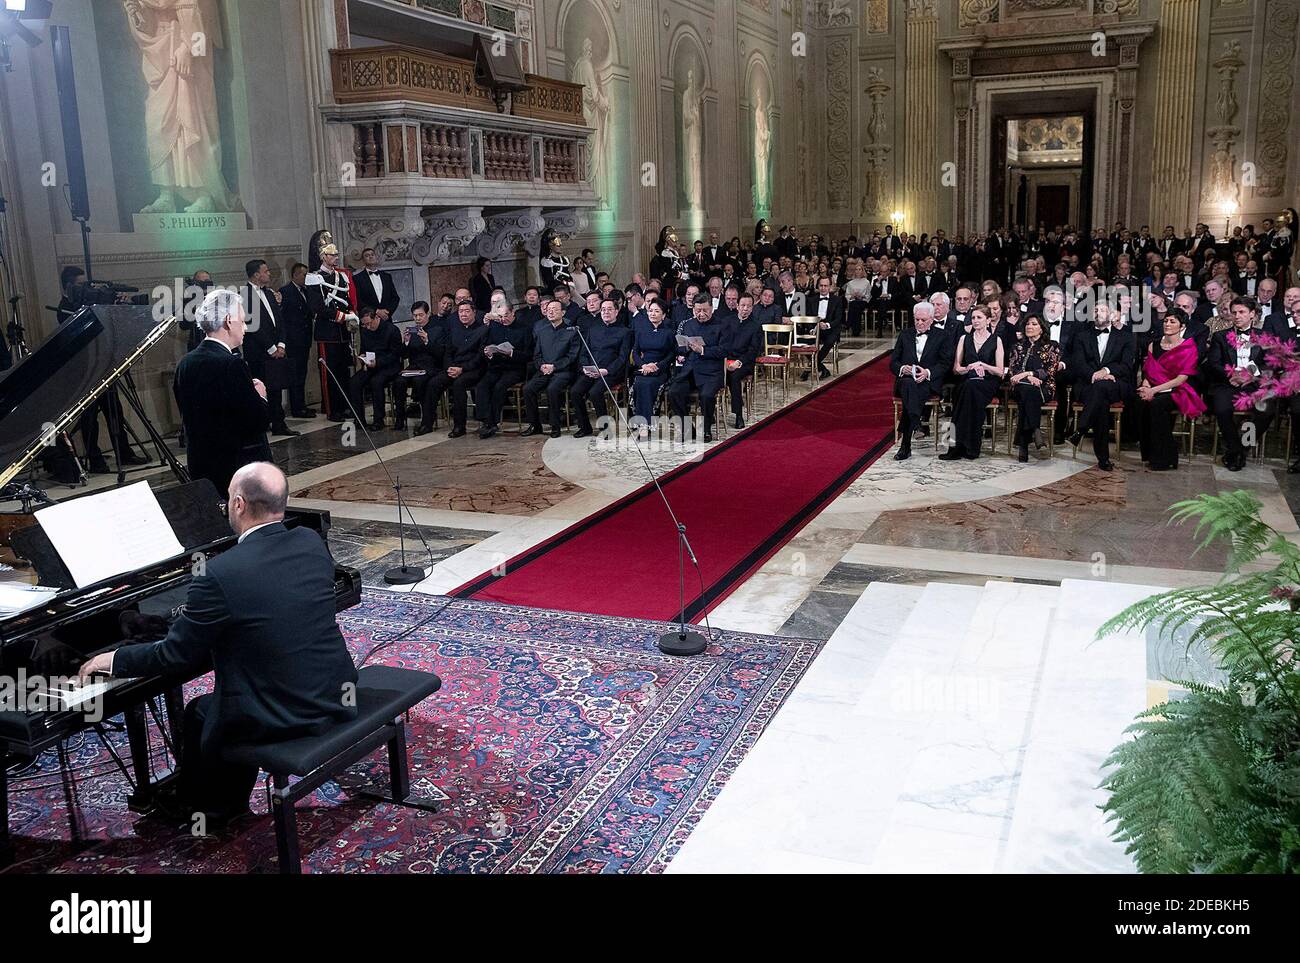 Italian President Sergio Mattarella and Chinese President Xi Jinping and his wife Peng Liyuan attend a concert of italian tenor Andrea Bocelli after the state dinner at the Quirinale presidential palace in Rome, Italy, on March 22, 2019 as part of Xi Jinping's two-day visit to Italy. Photo by ABACAPRESS.COM Stock Photo